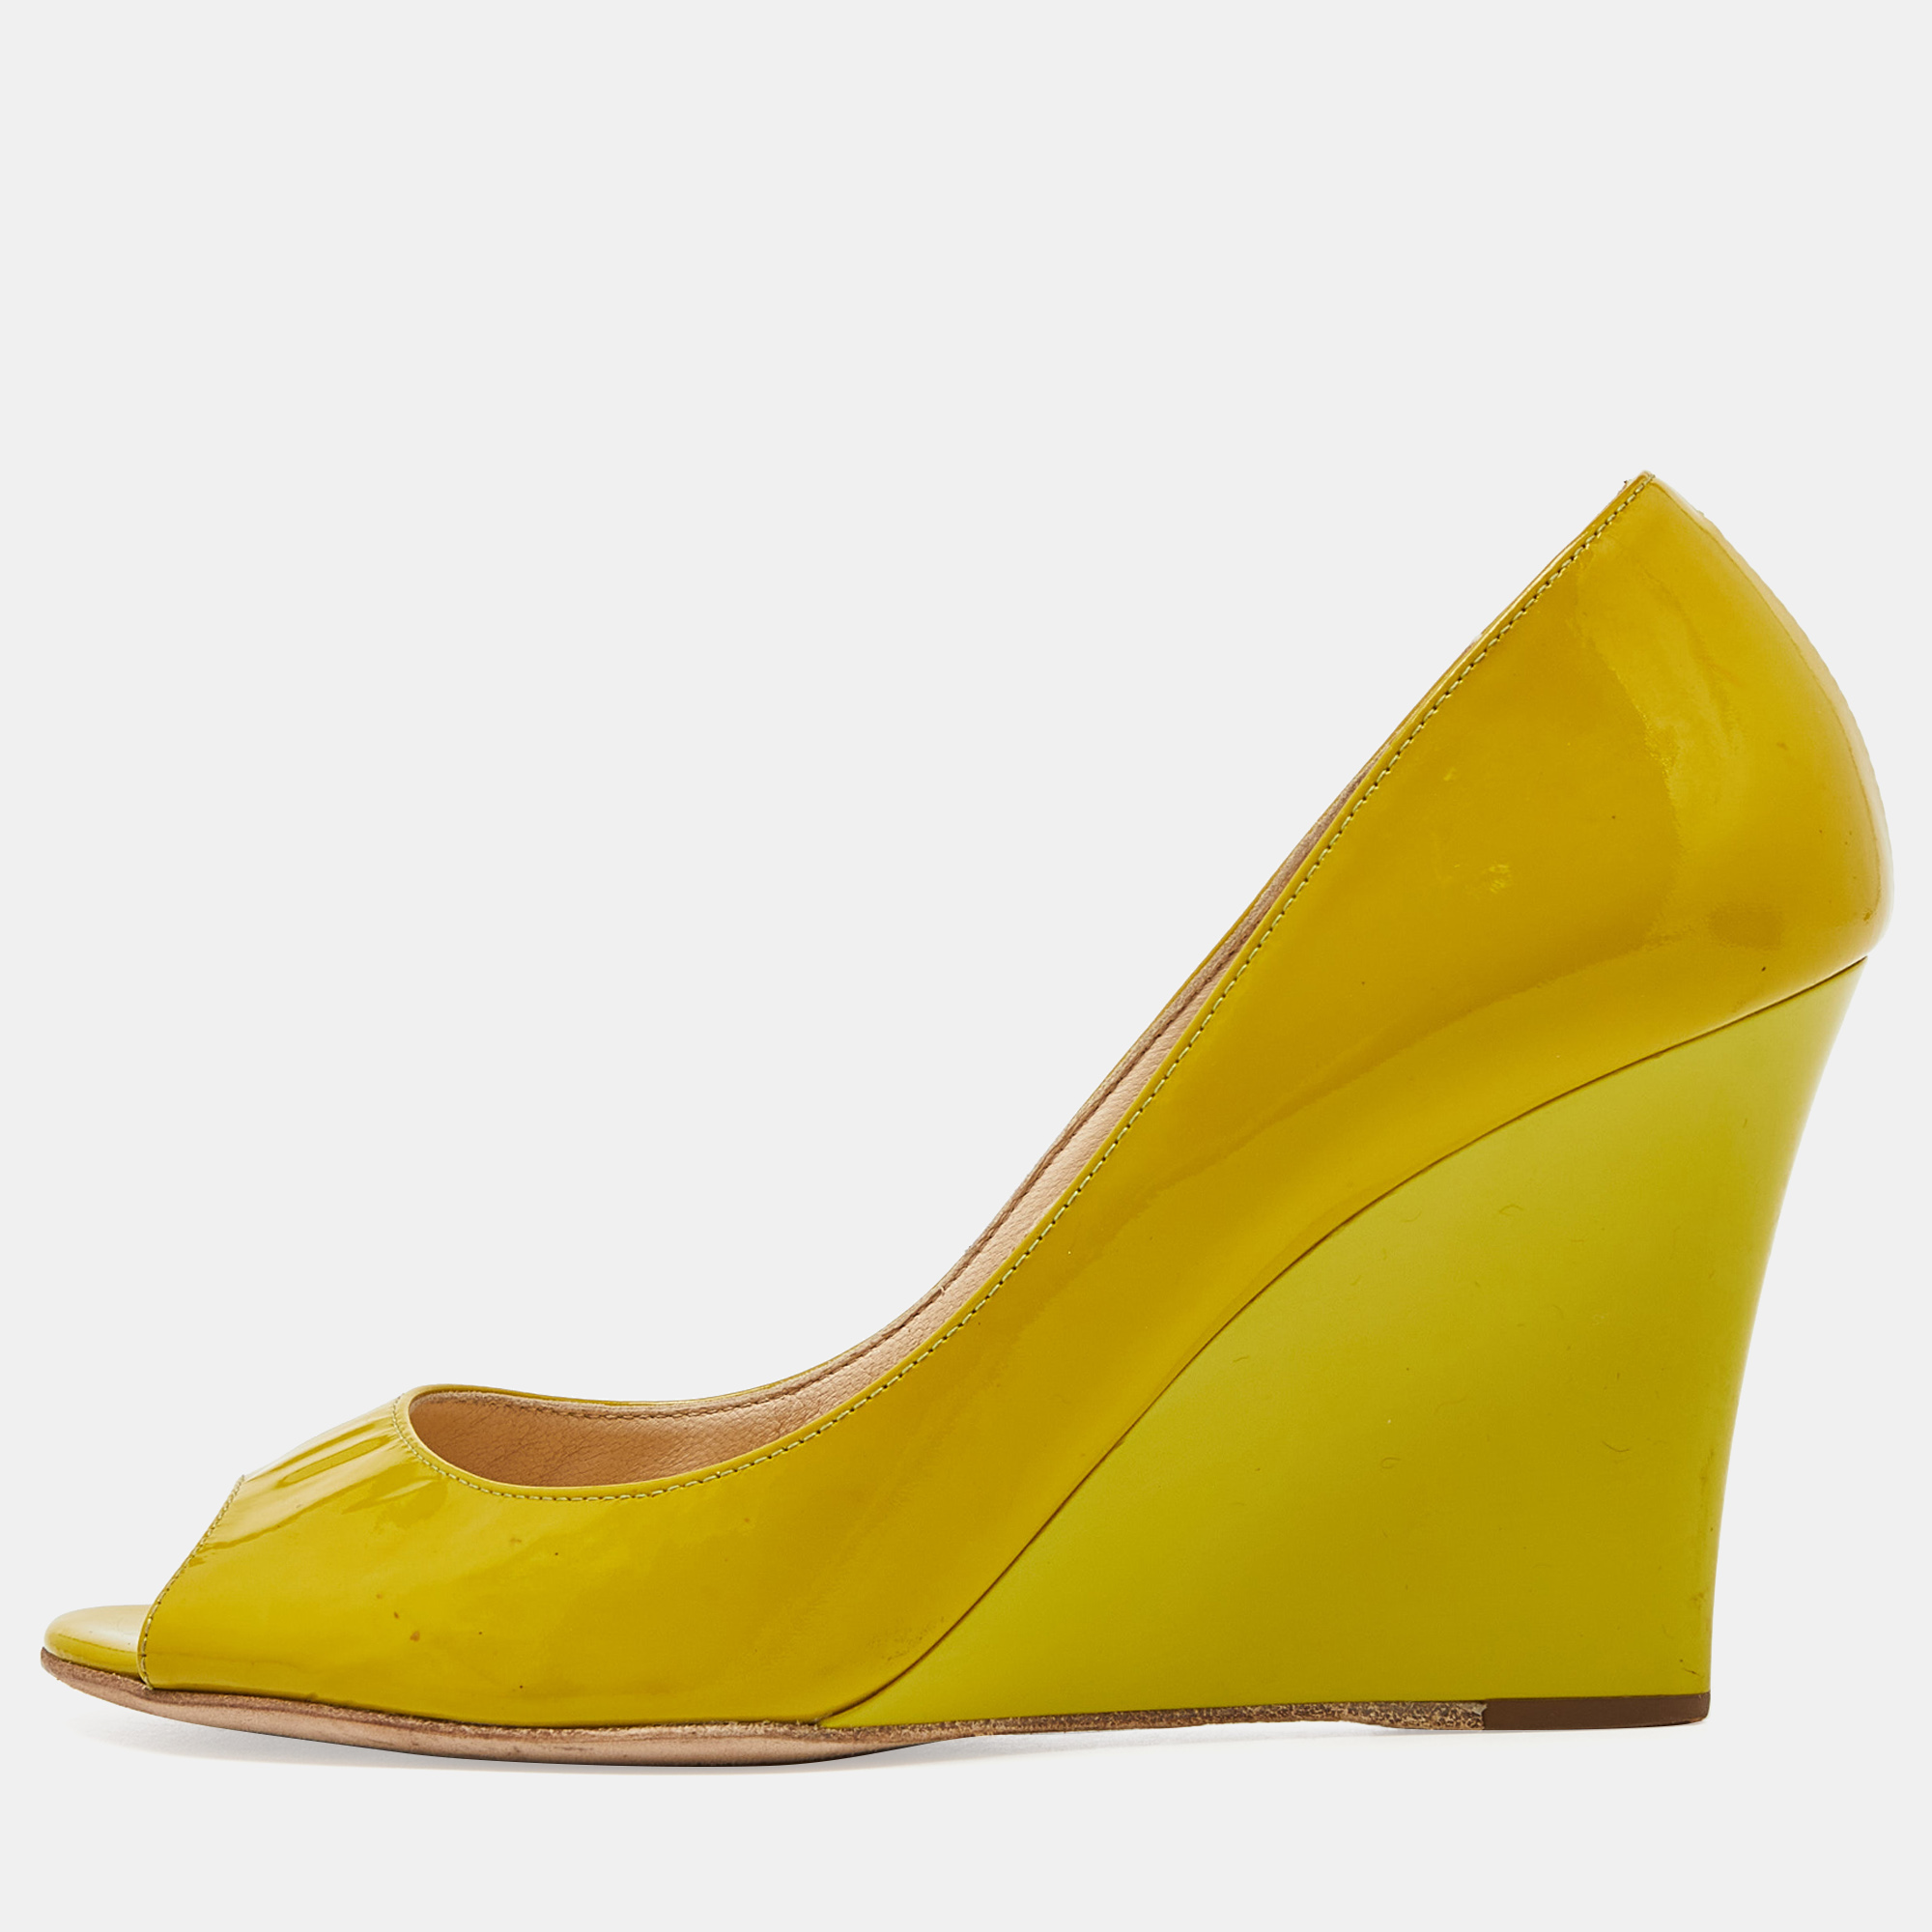 Pre-owned Jimmy Choo Yellow Patent Leather Baxen Peep Toe Wedge Pumps 36